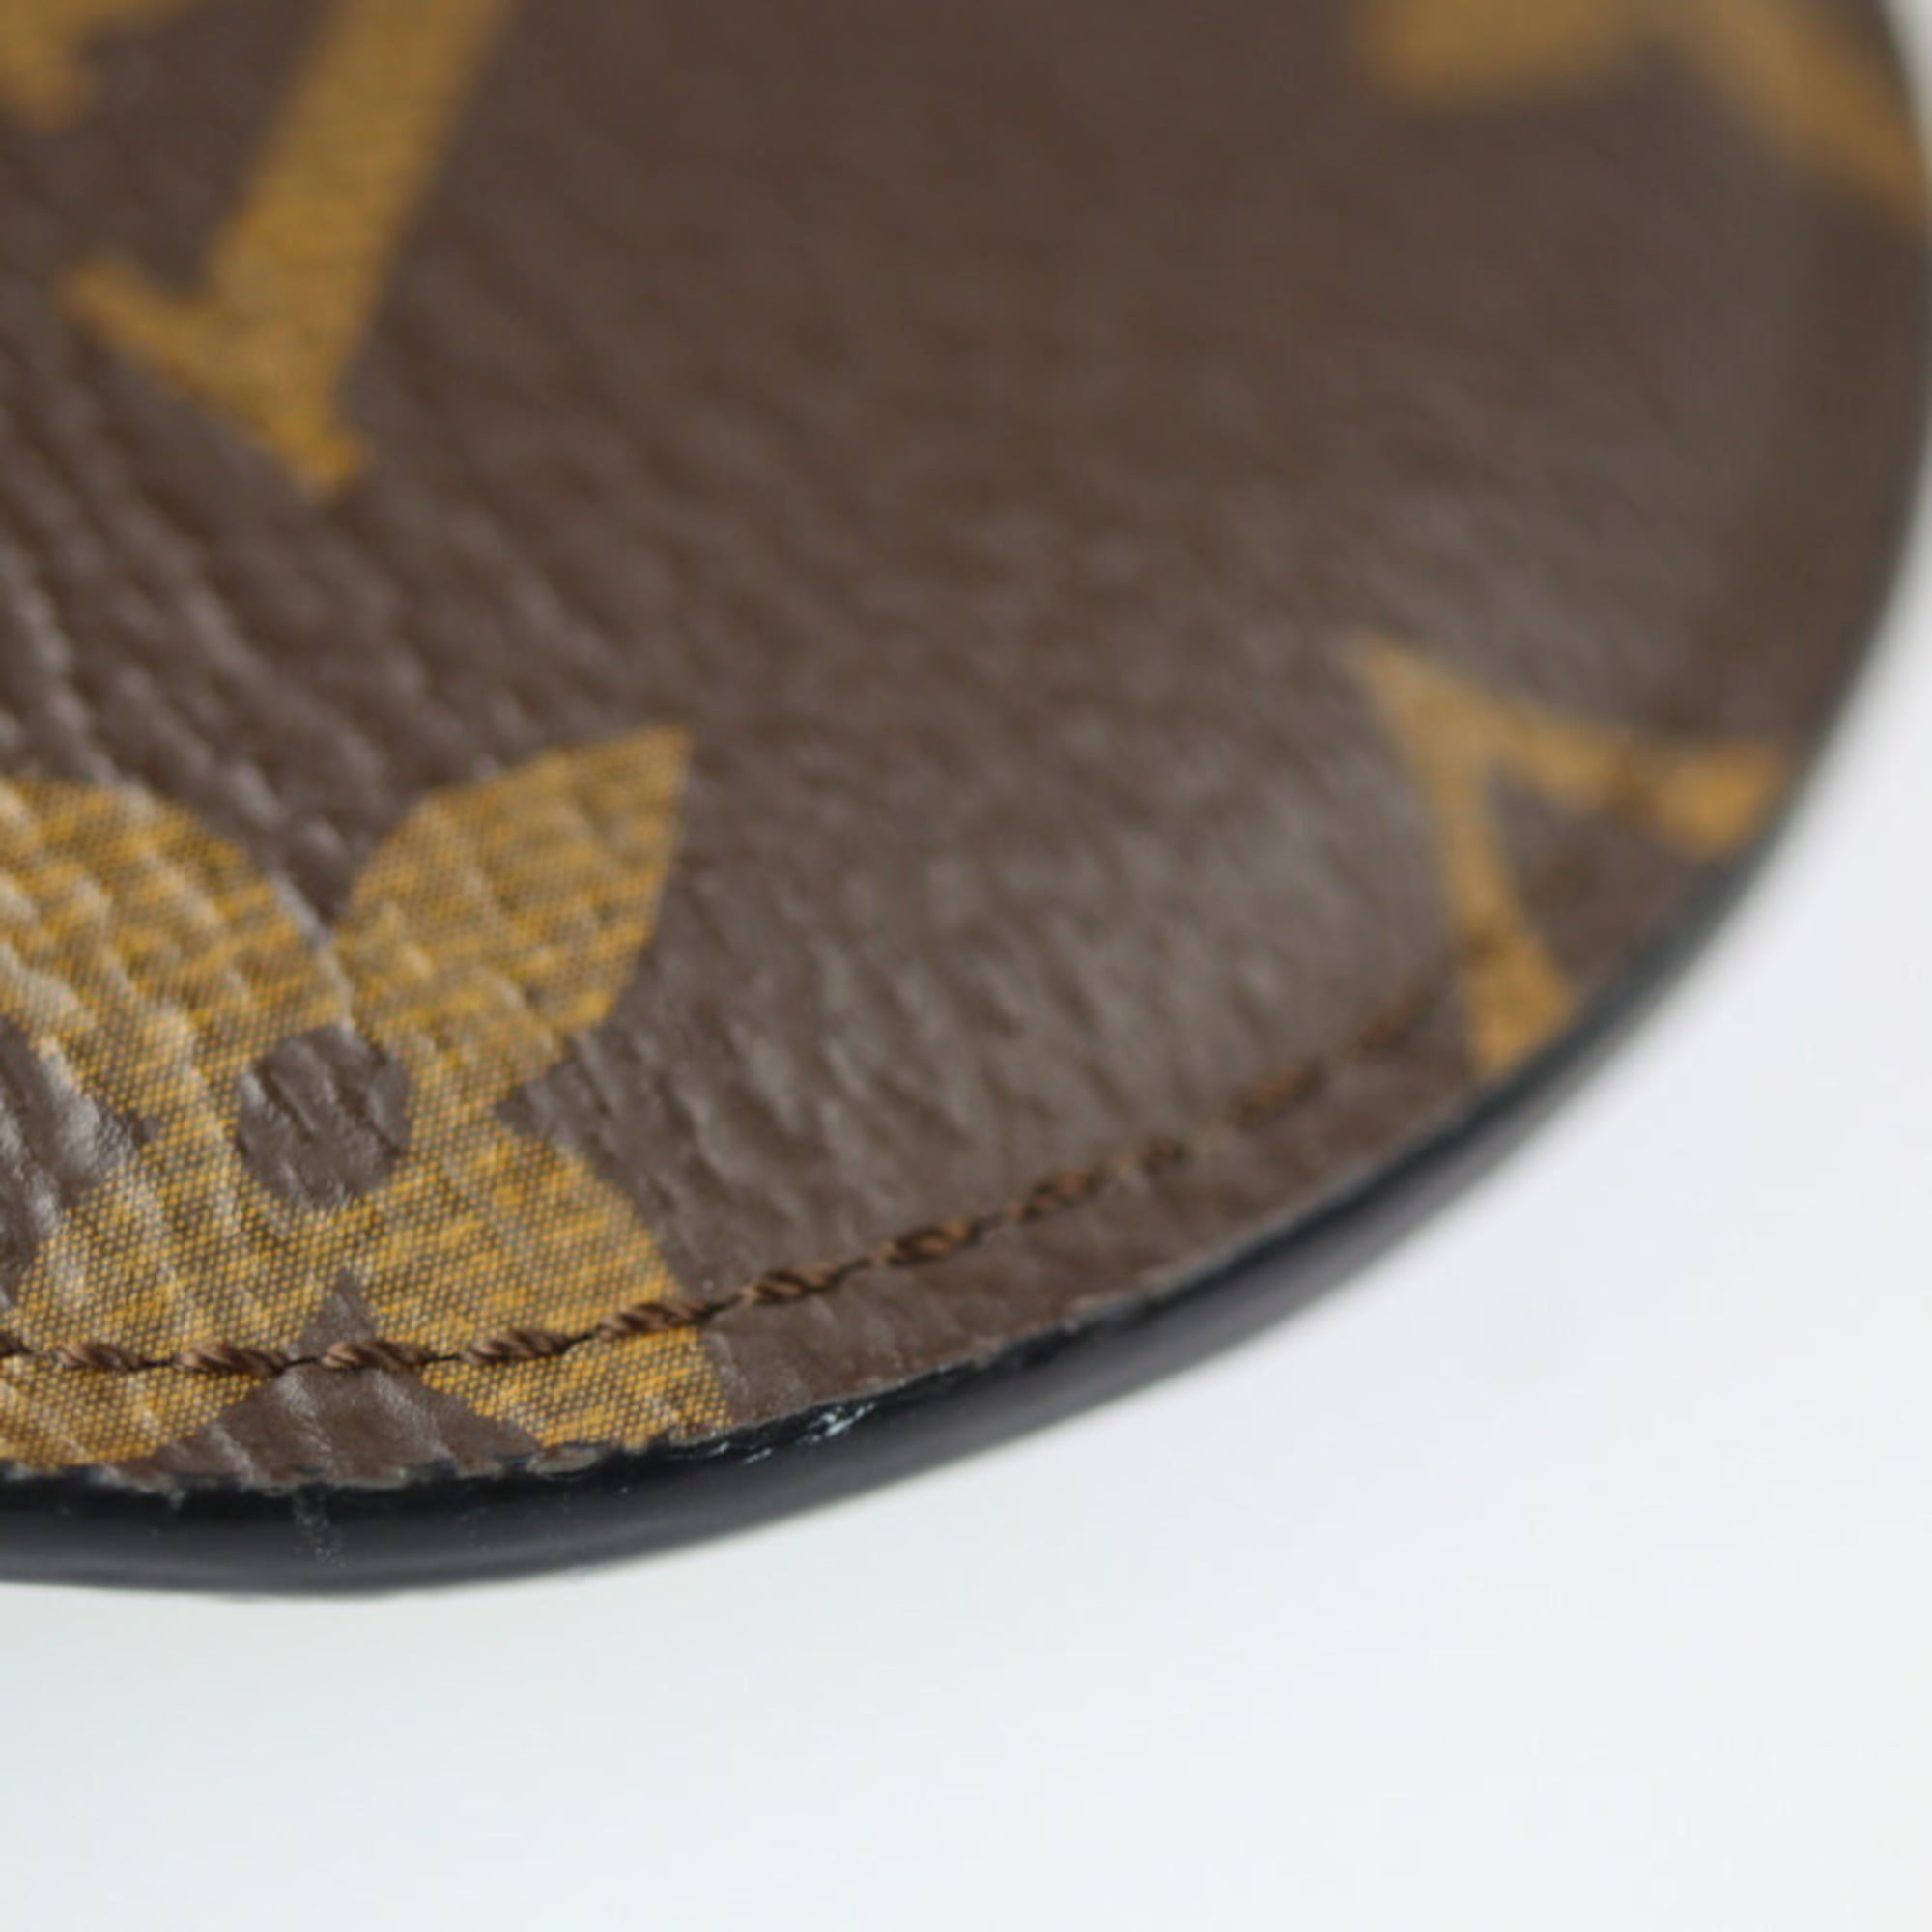 Key ring Louis Vuitton Brown in Synthetic - 31612250